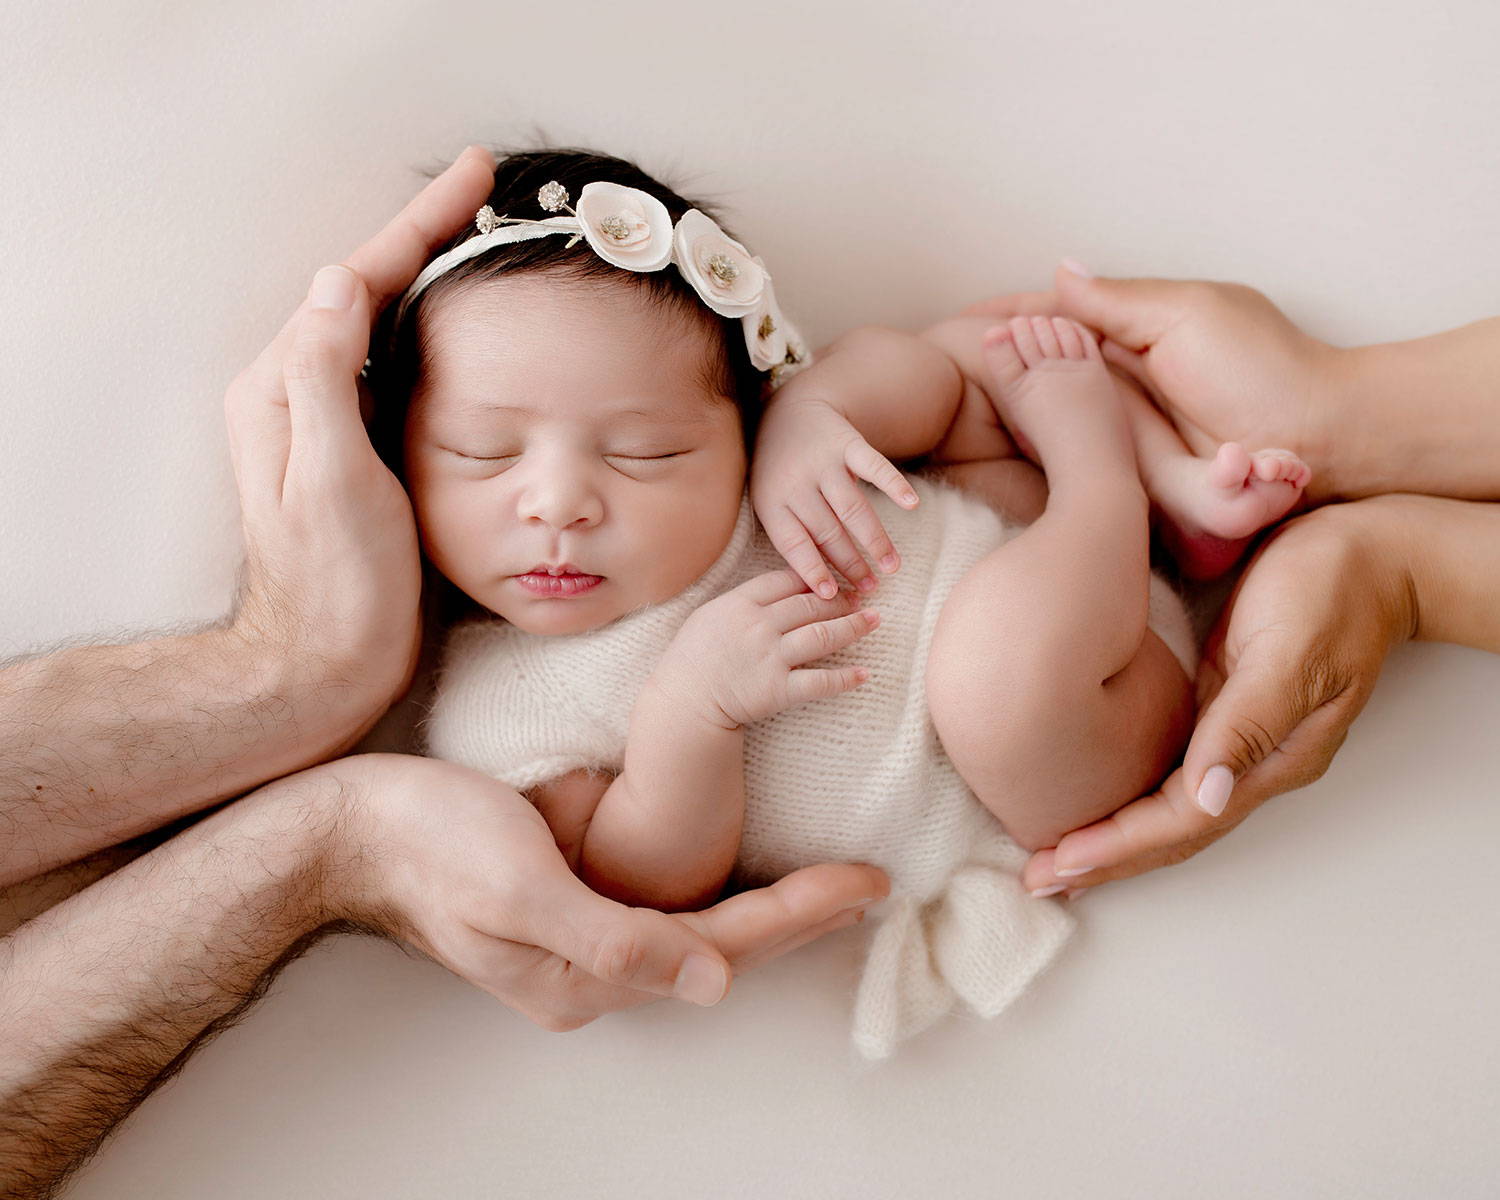 11 Photoshop Tips You Can Use to Perfect Your Newborn Images